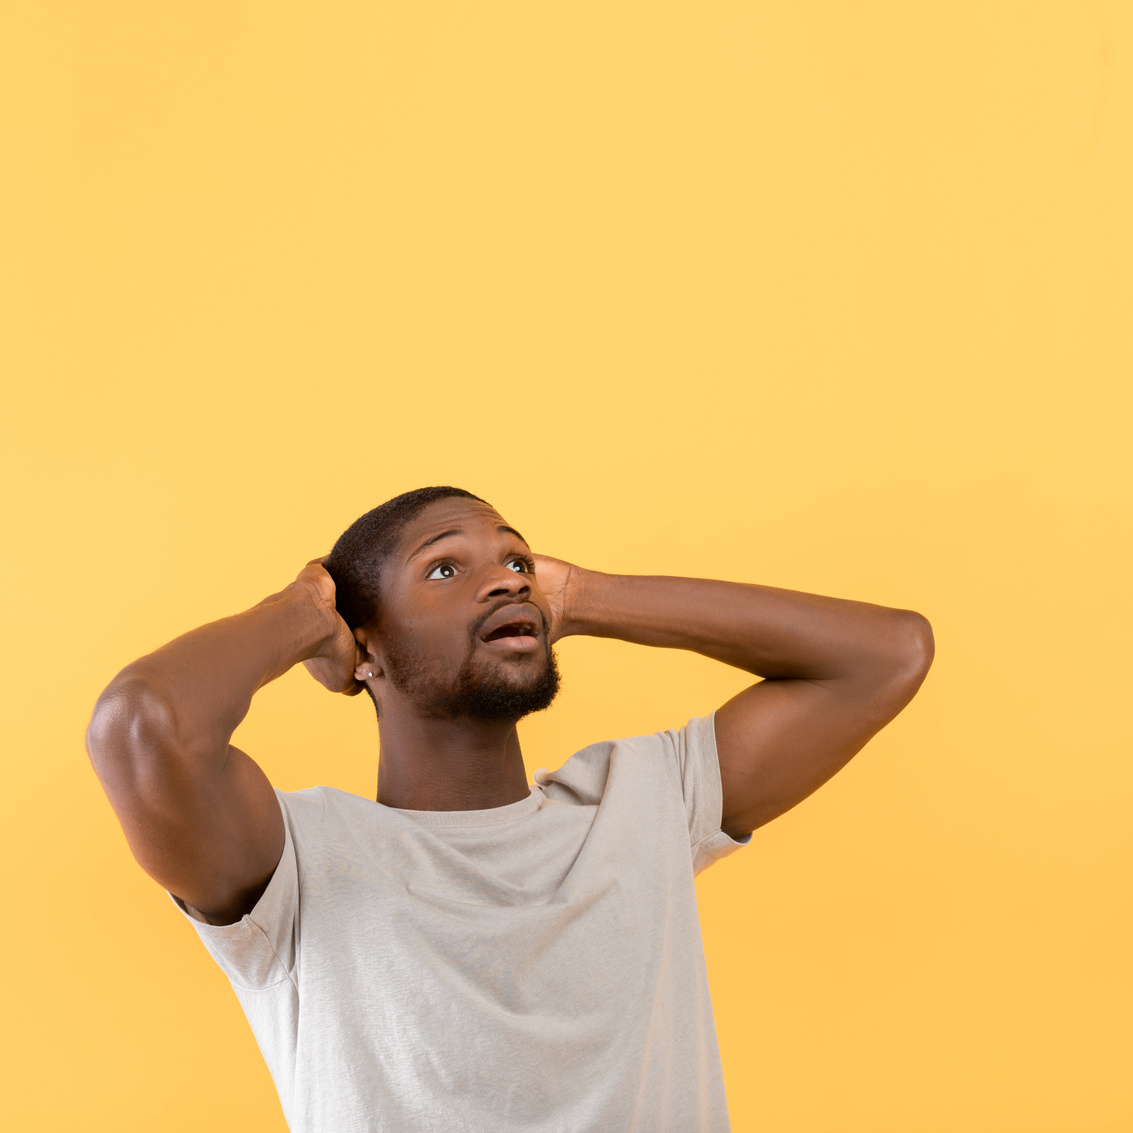 Shocking Offer. Emotional Black Guy Looking up at Free Space with Open Mouth, Standing over Yellow Background